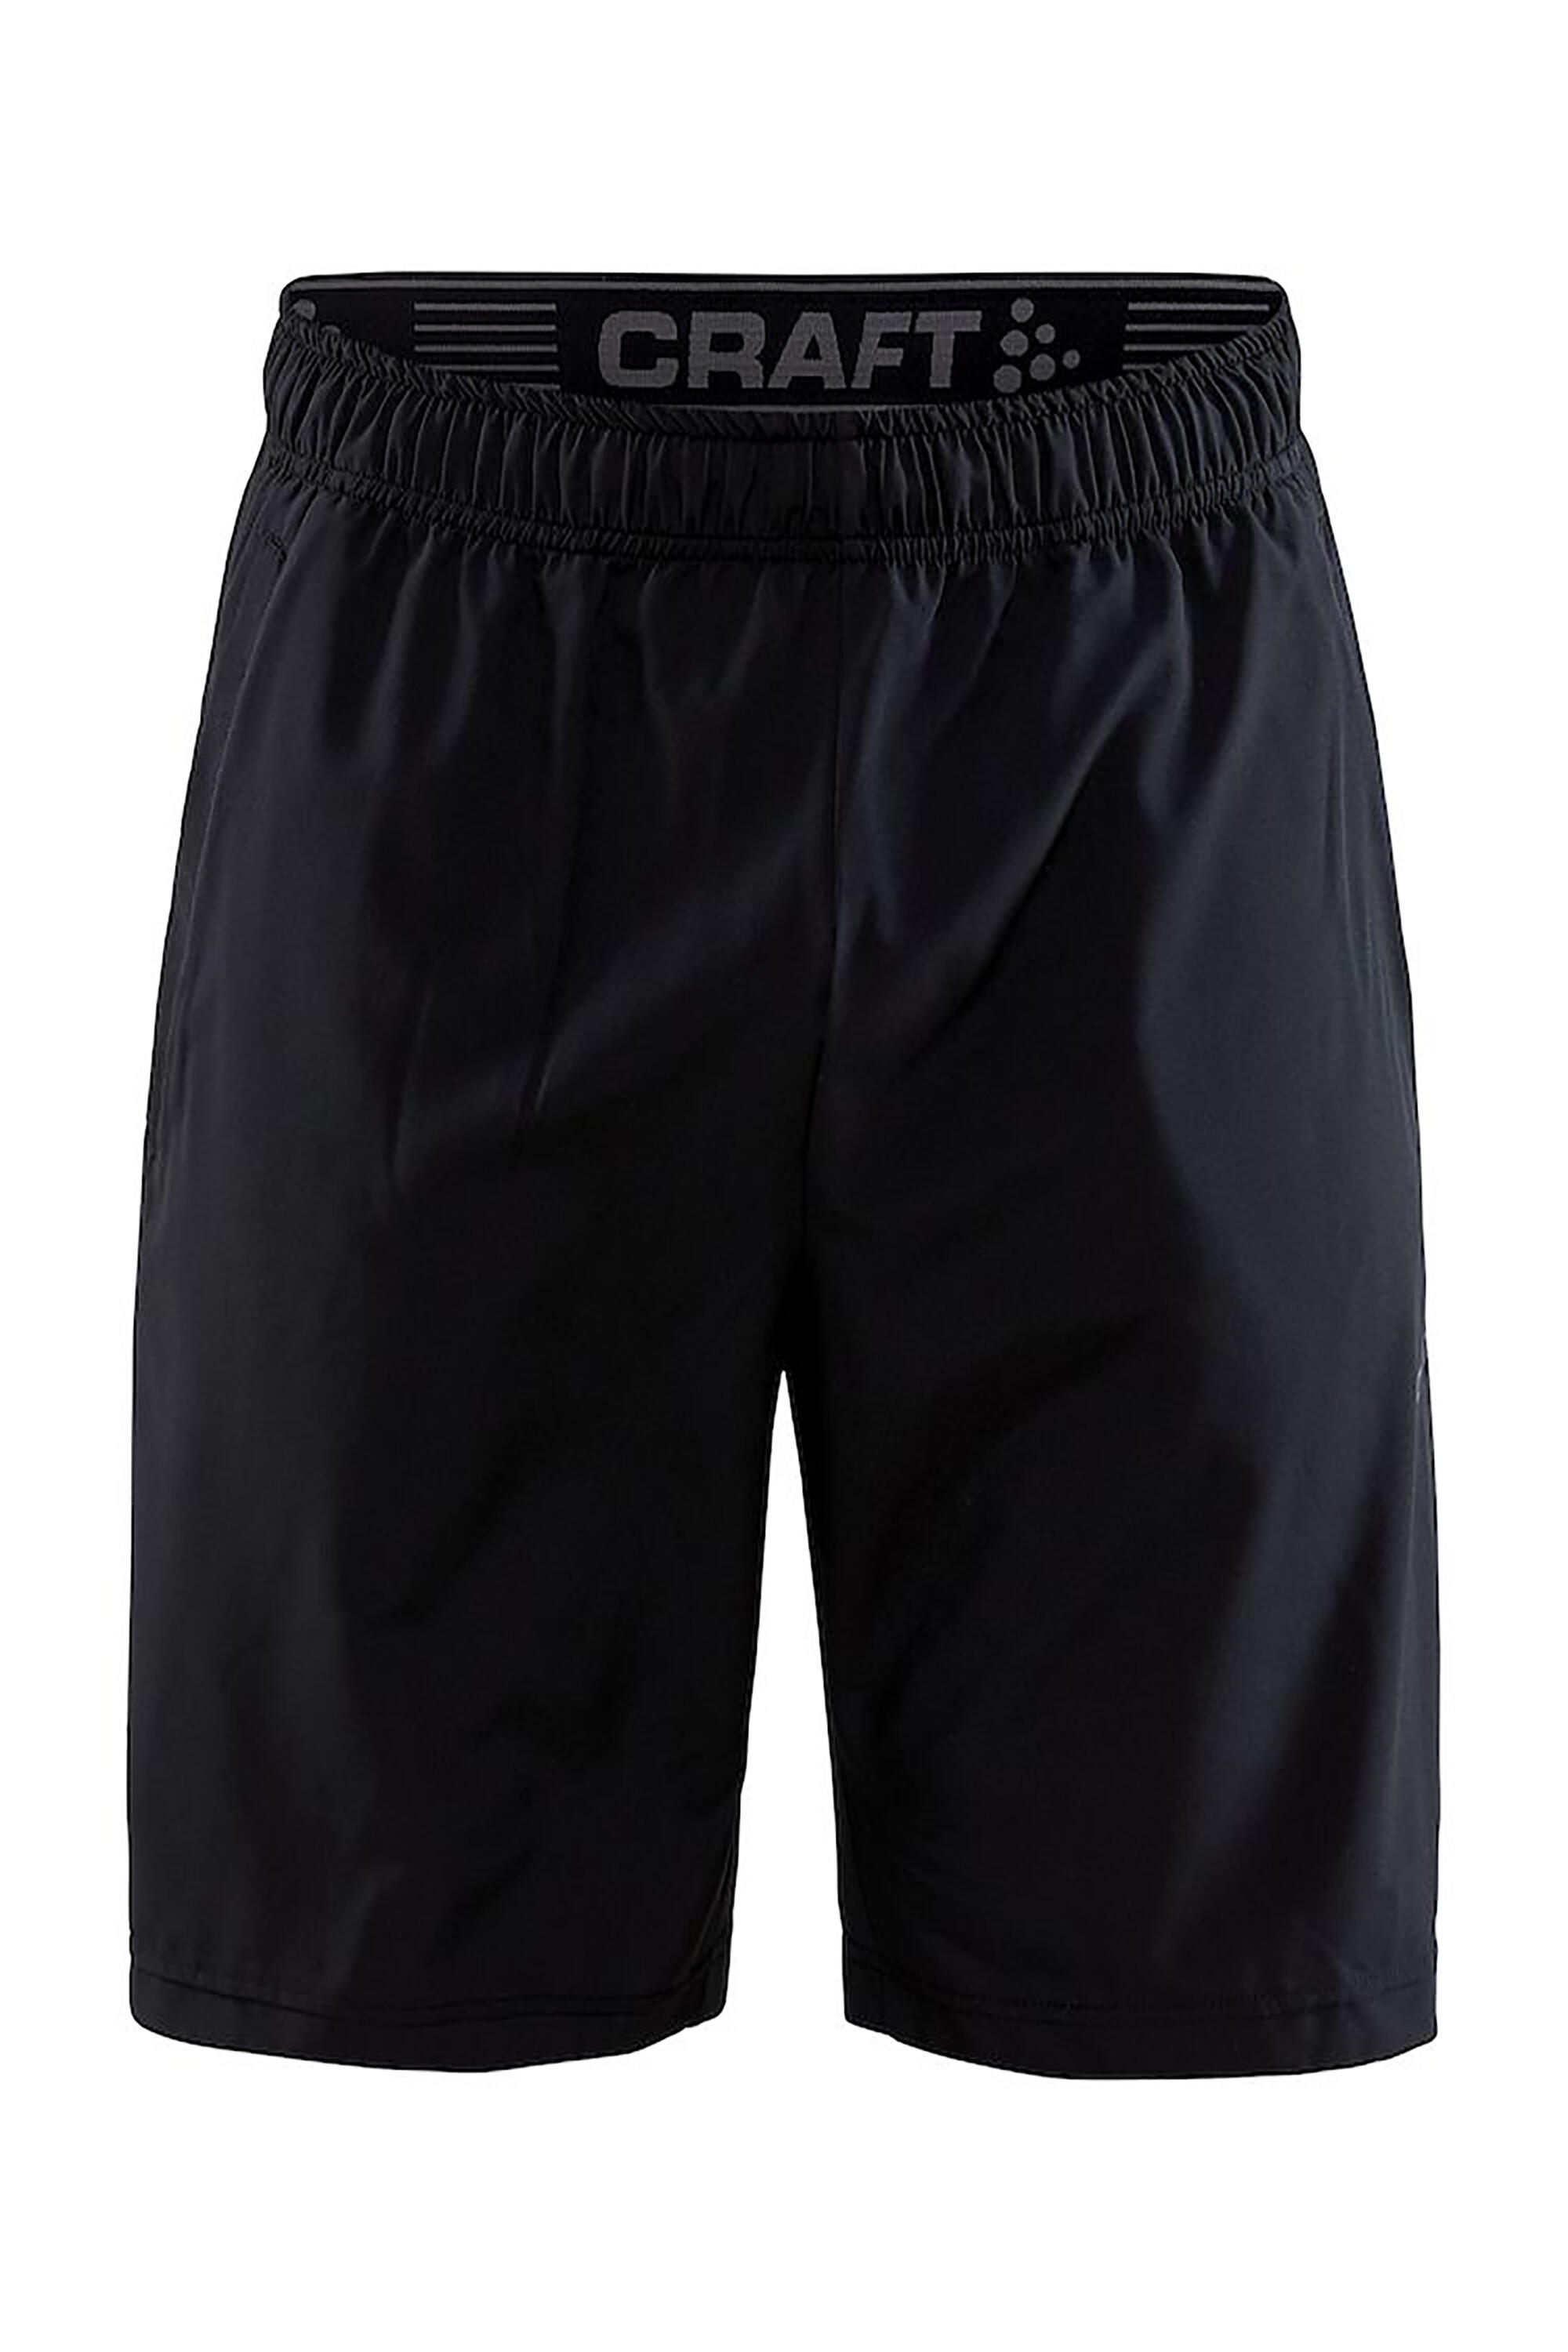 CRAFT Core Charge Shorts Men